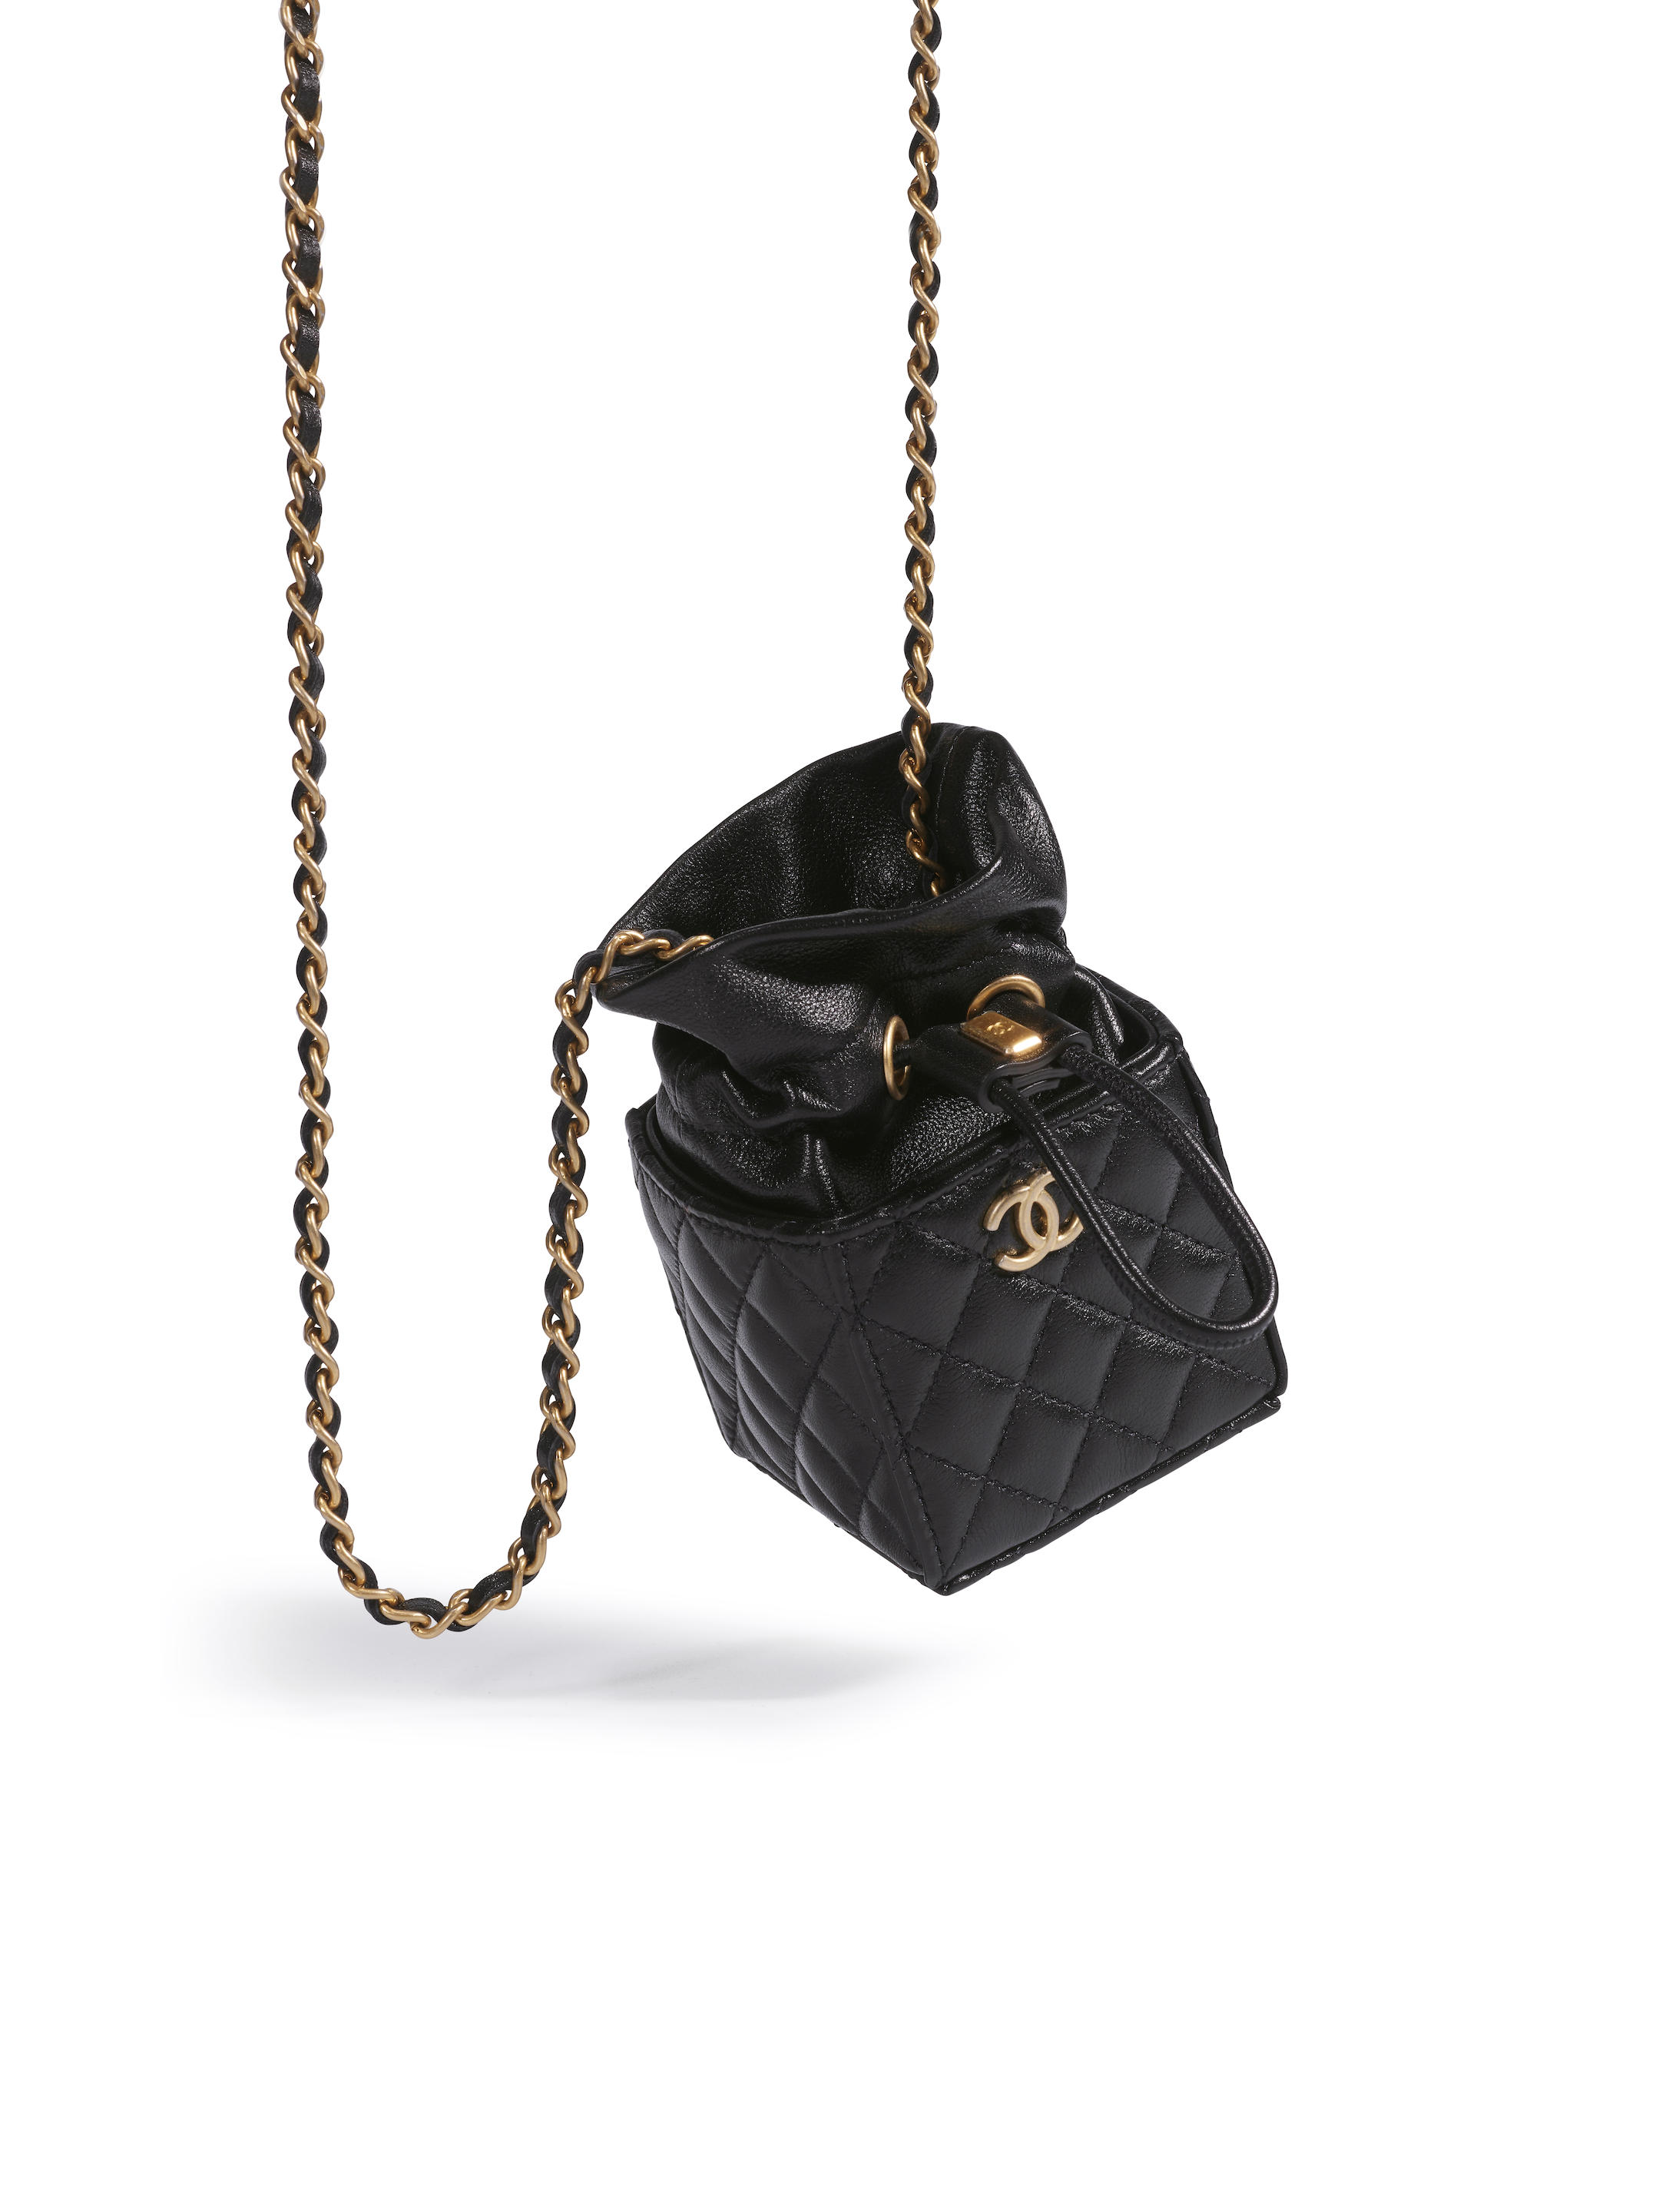 Bonhams : CHANEL BLACK LAMBSKIN LIPSTICK CASE WITH GOLD TONED CHAIN ( Includes authenticity card and original dust bag)